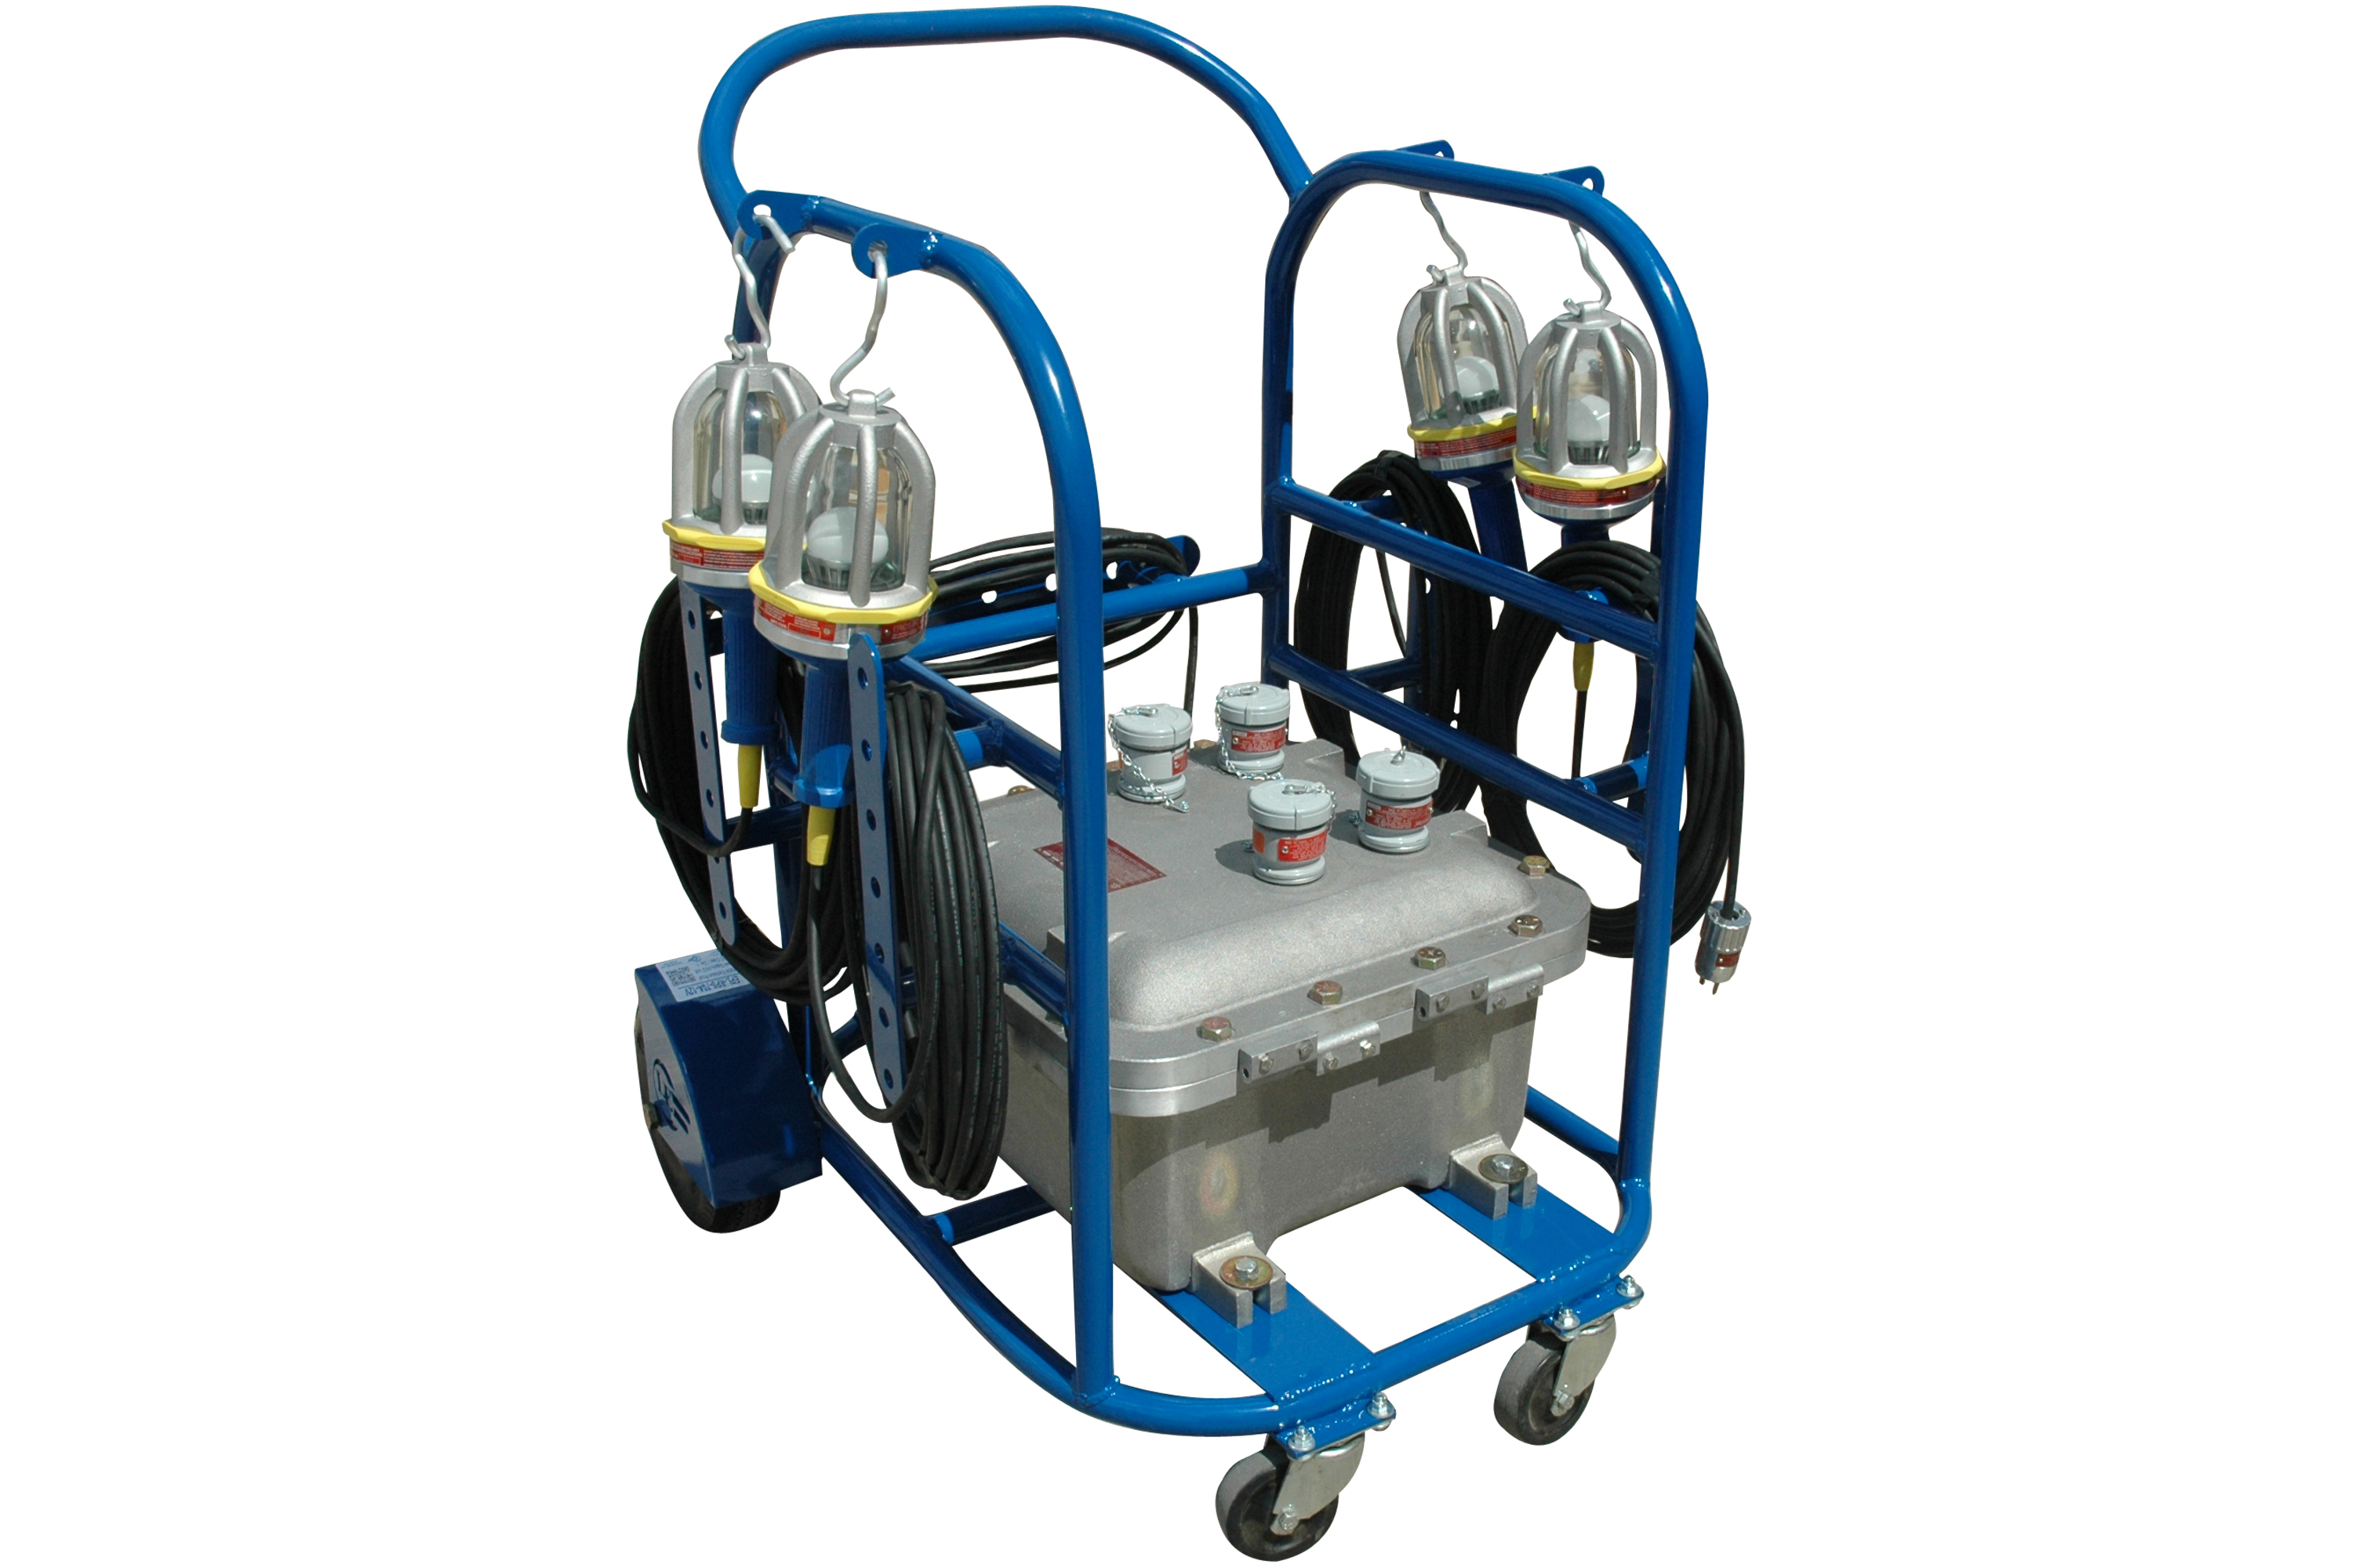 The Magnalight EPLC-112 Four Drop Light GFI Cart provides a mobile lighting solution for applications requiring multiple explosion proof light sources that can be easily managed in the workspace.